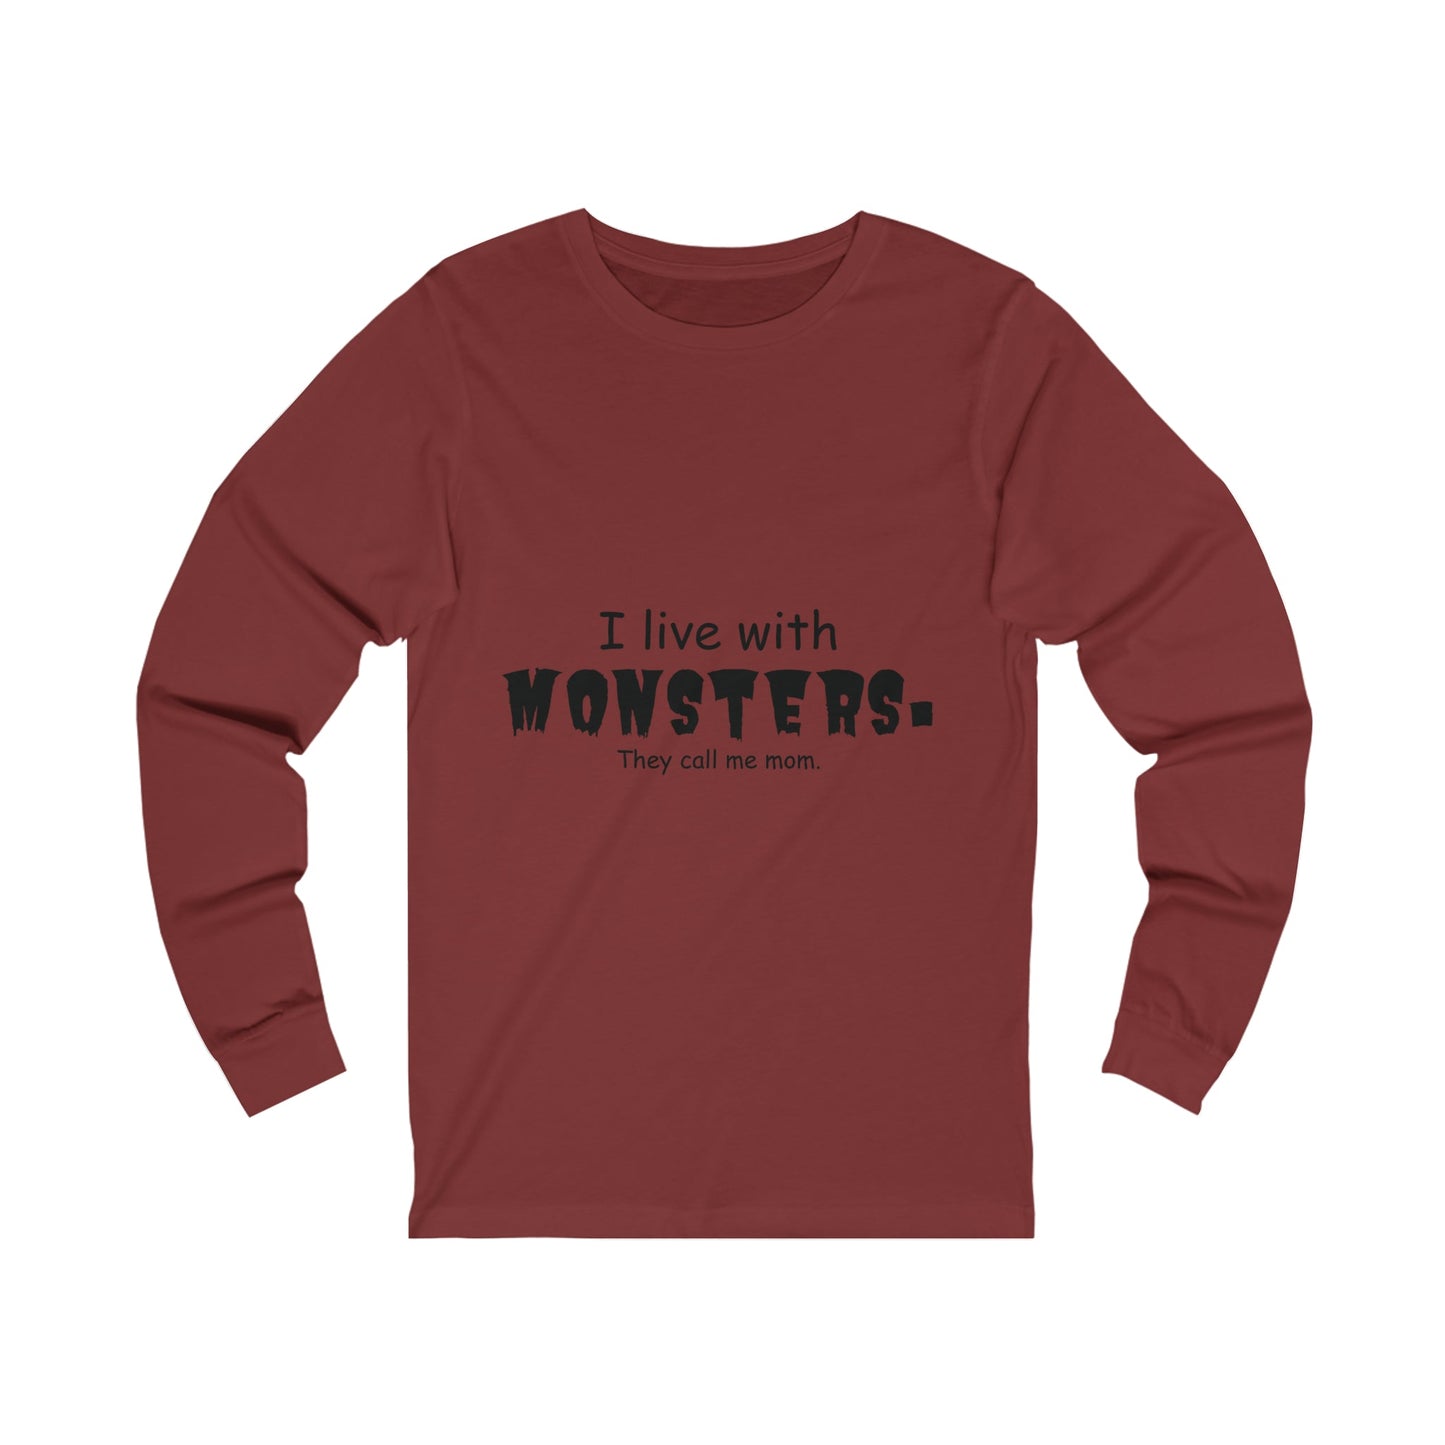 I Live With Monsters They Call Me Mom Jersey Long Sleeve Tee ShirtLong - sleeveVTZdesignsSCardinalCrew neckDTGhalloween